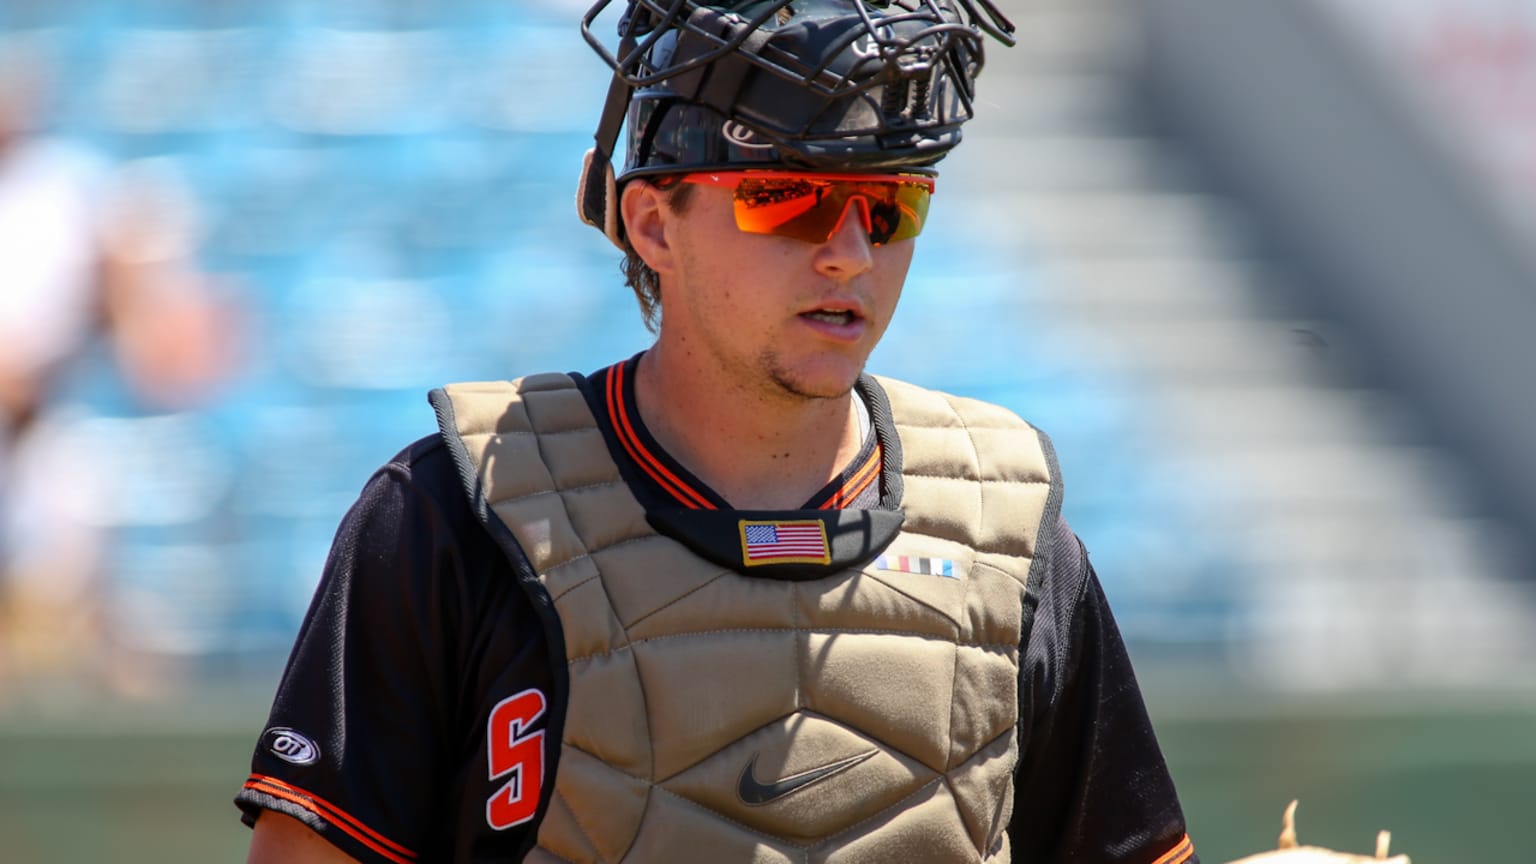 Backstop backlog: Why did the Giants pick NC State catcher Patrick Bailey?  - The Athletic